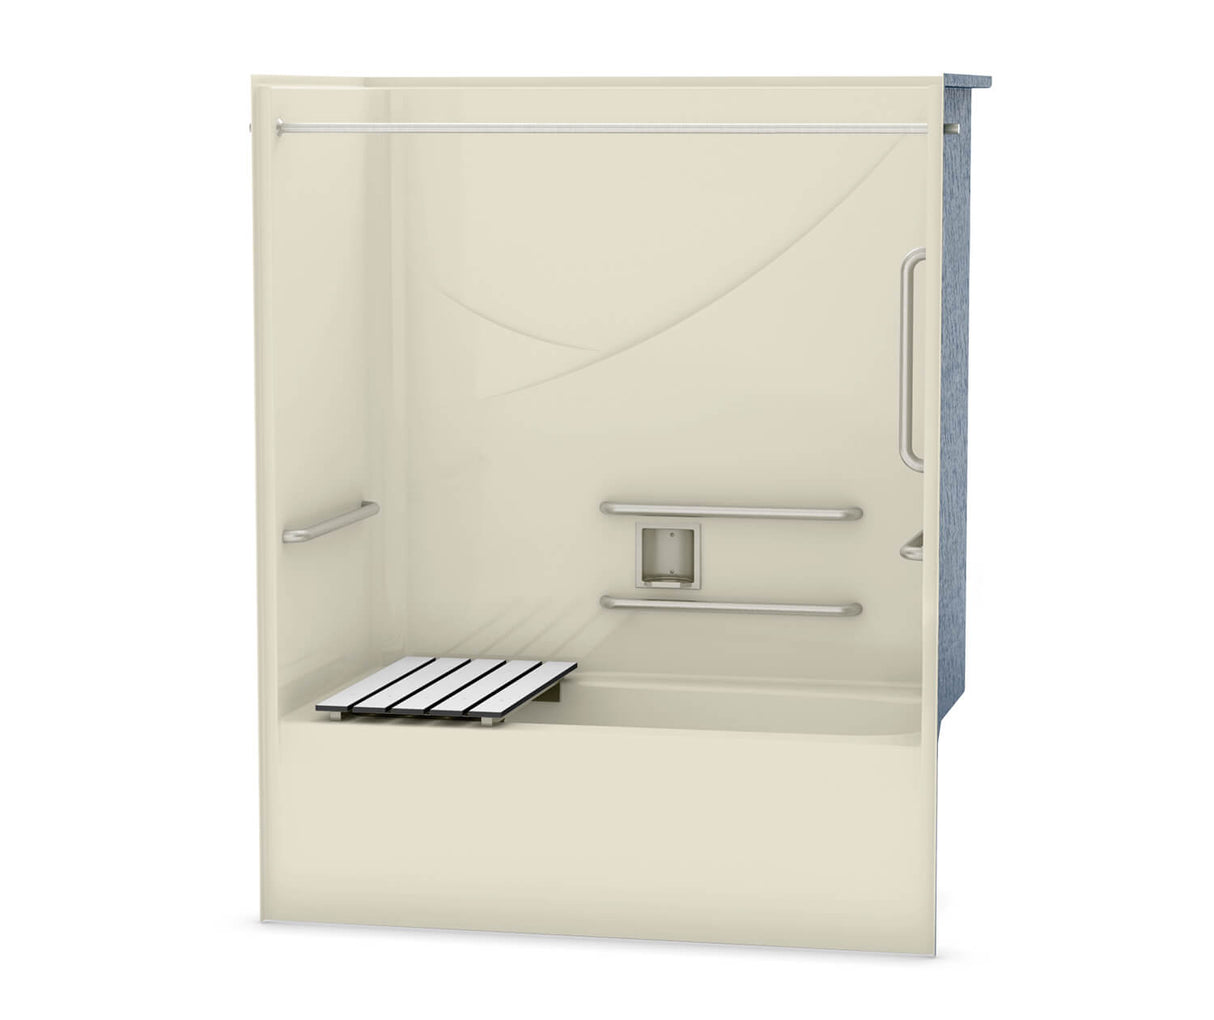 Aker OPTS-6032 AcrylX Alcove Right-Hand Drain One-Piece Tub Shower in Sterling Silver - ANSI Grab Bars and Seat